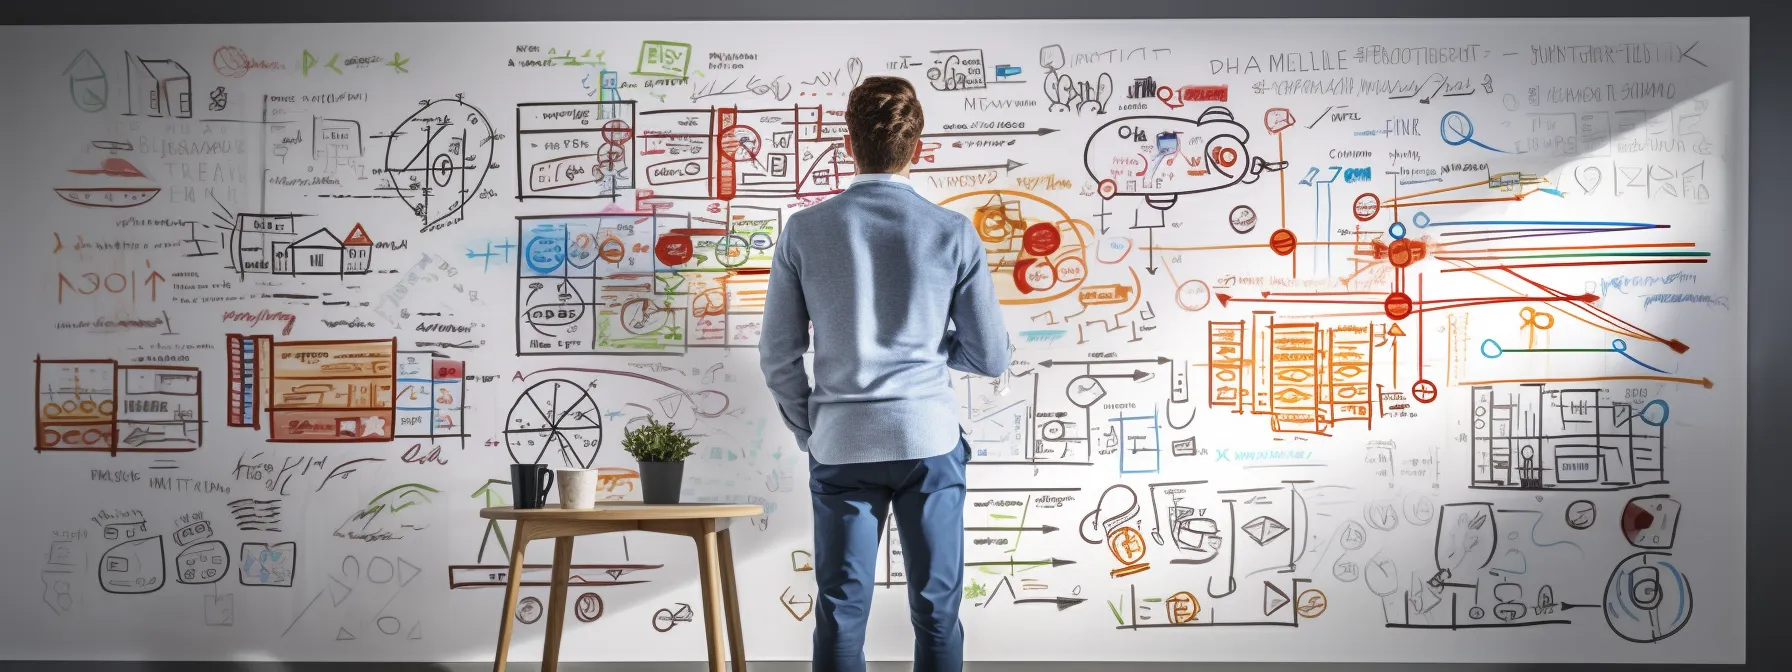 a person studying a whiteboard covered in diagrams and notes about on-page and off-page seo strategies.